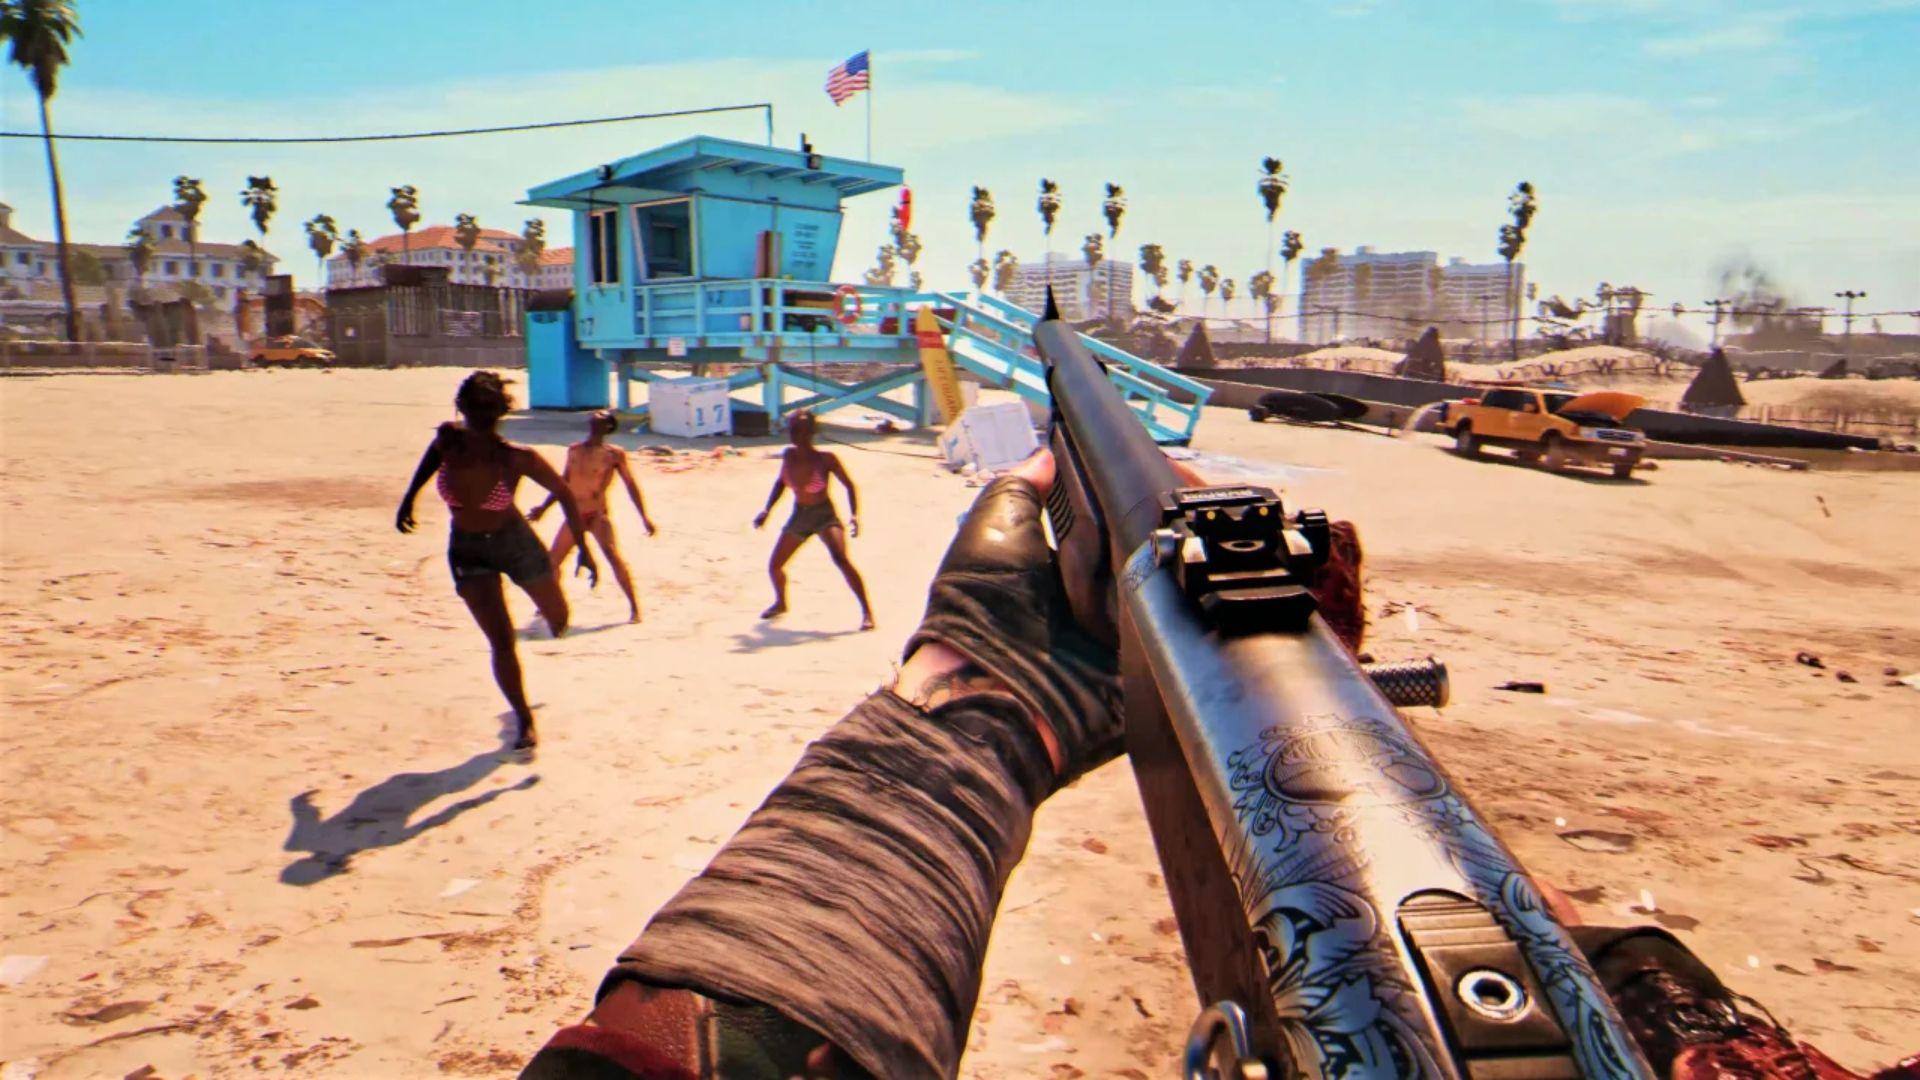 Does Dead Island 2 have co-op multiplayer? - Dexerto